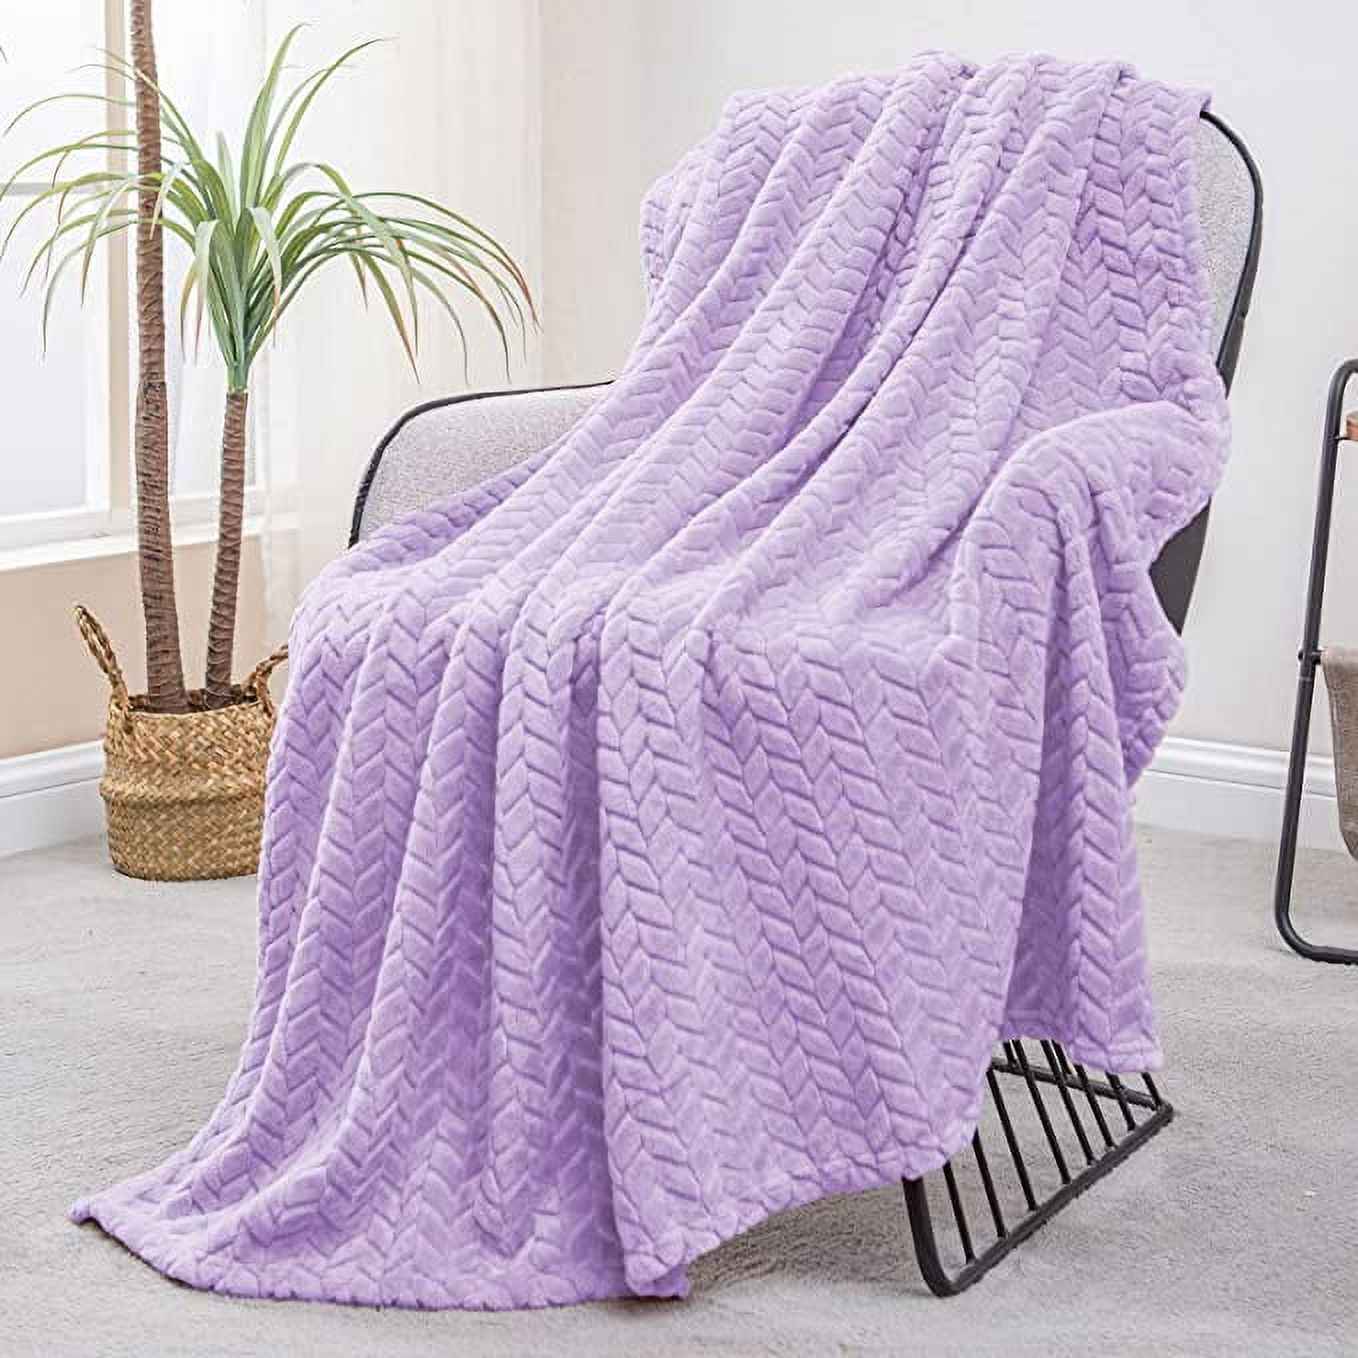 1pc Throw Blanket, 300 GSM Flannel Fleece Blanket, Soft Cozy Blanket for  Kids, Cute Small Blanket for Travel and Bed, 28x40, Lilac